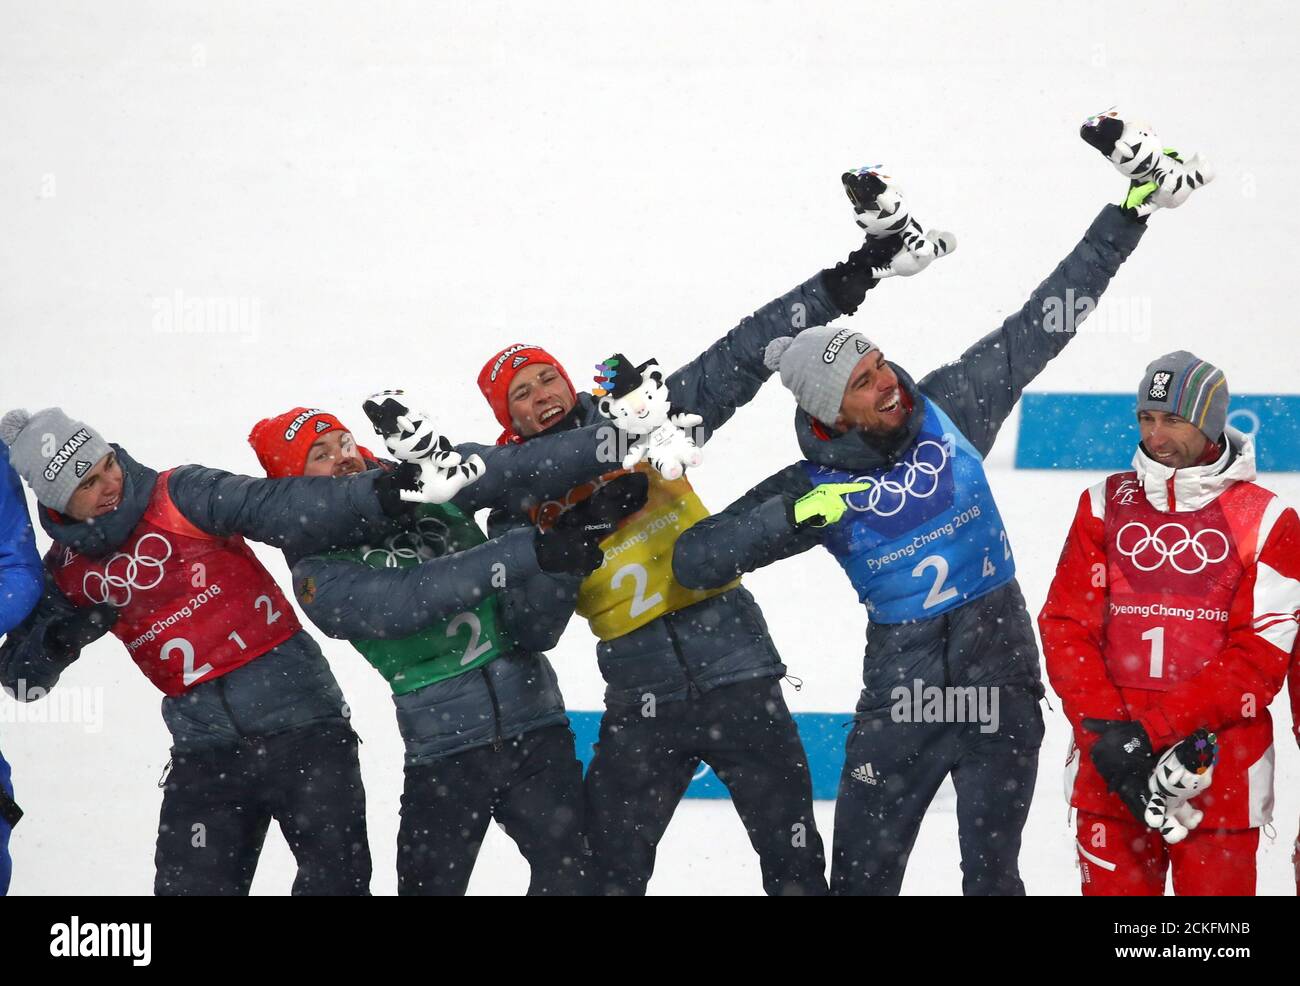 Nordic Combined Events - Pyeongchang 2018 Winter Olympics - Men's Team 4 x 5 km Final - Alpensia Cross-Country Skiing Centre - Pyeongchang, South Korea - February 22, 2018 -  Gold medallists Vinzenz Geiger, Fabian Riessle, Eric Frenzel and Johannes Rydzek of Germany celebrate during the flower ceremony. REUTERS/Carlos Barria Stock Photo